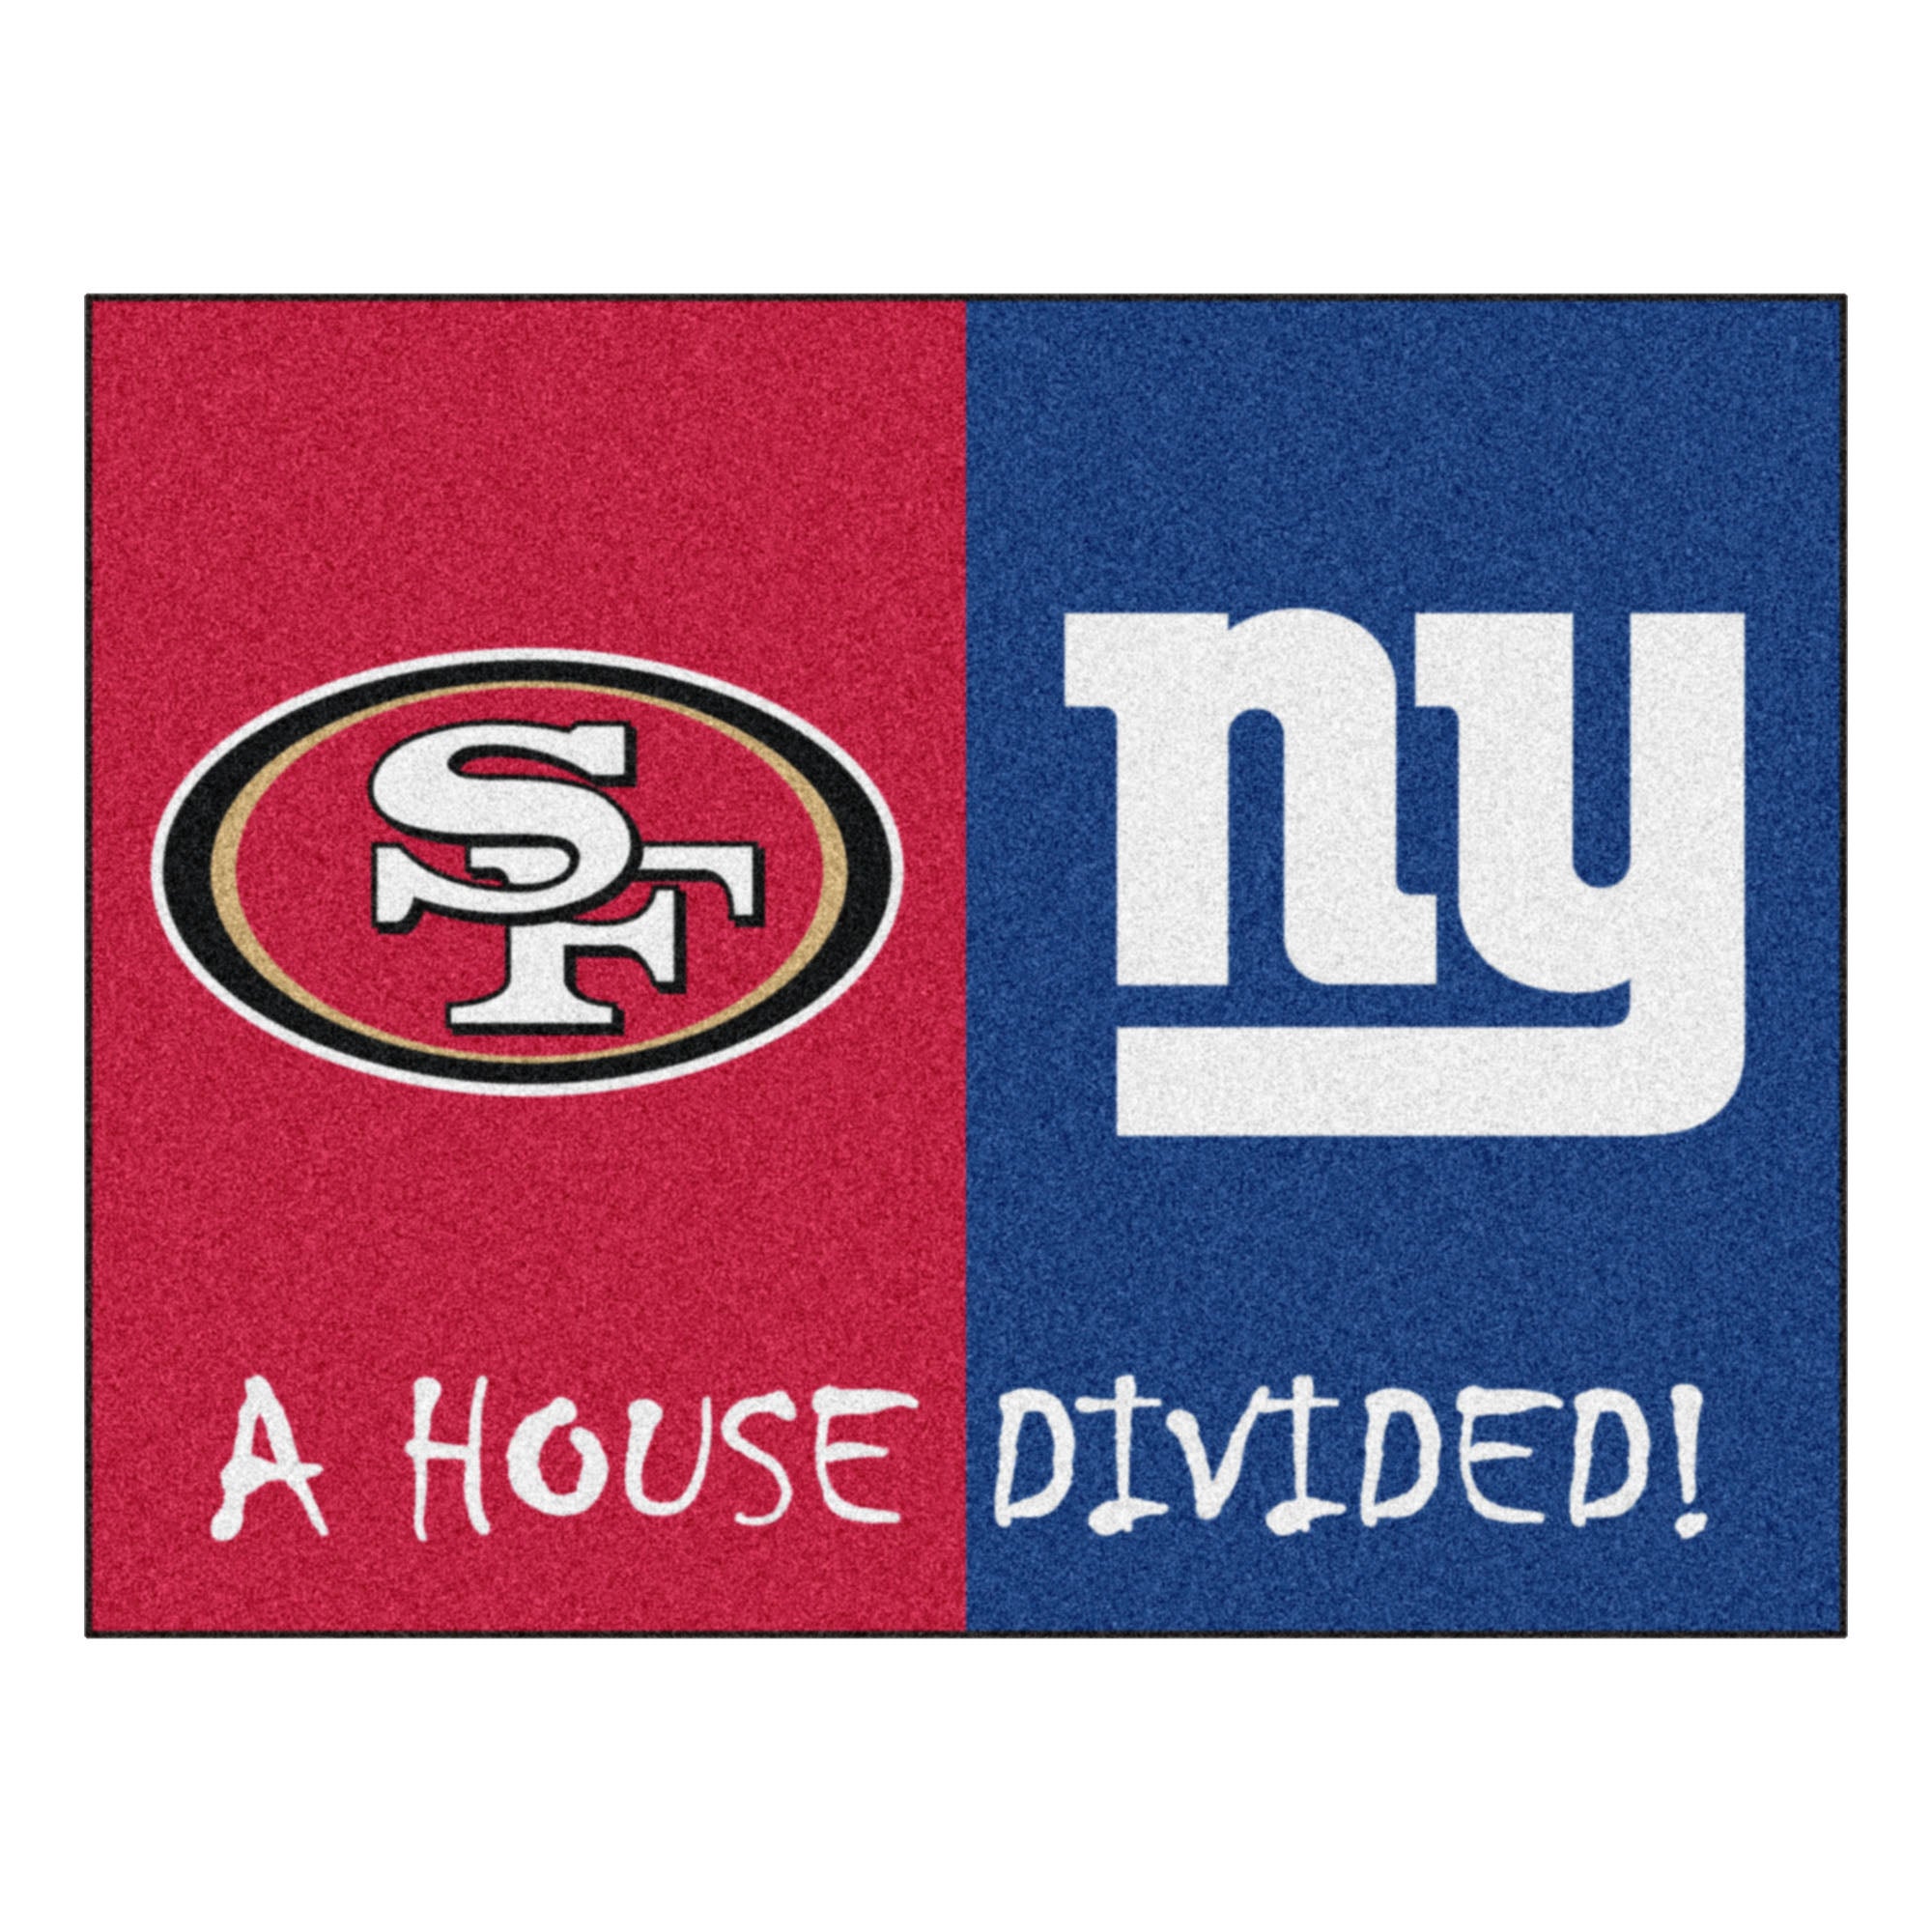 NFL House Divided - 49ers / Giants House Divided Mat